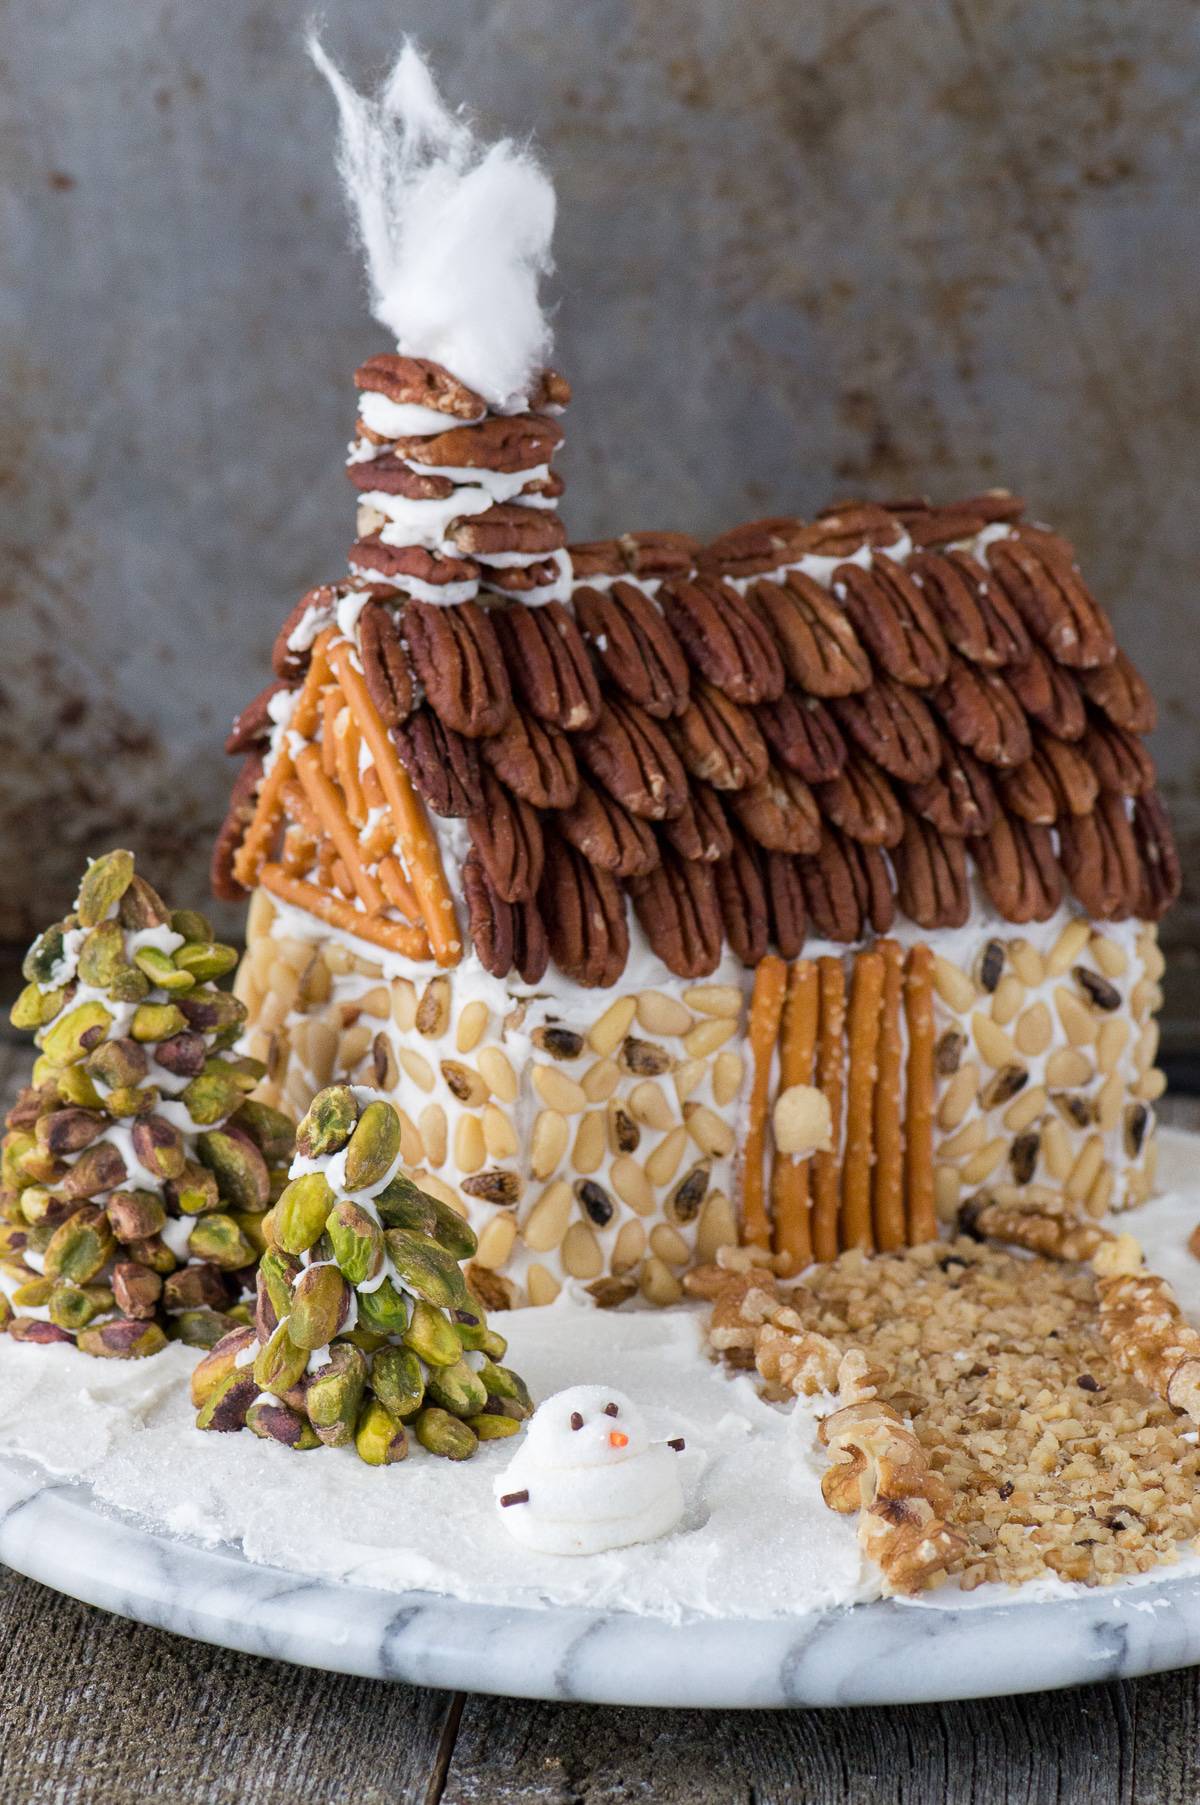 60 Best Gingerbread House Ideas the Internet Has to Offer | MyRecipes